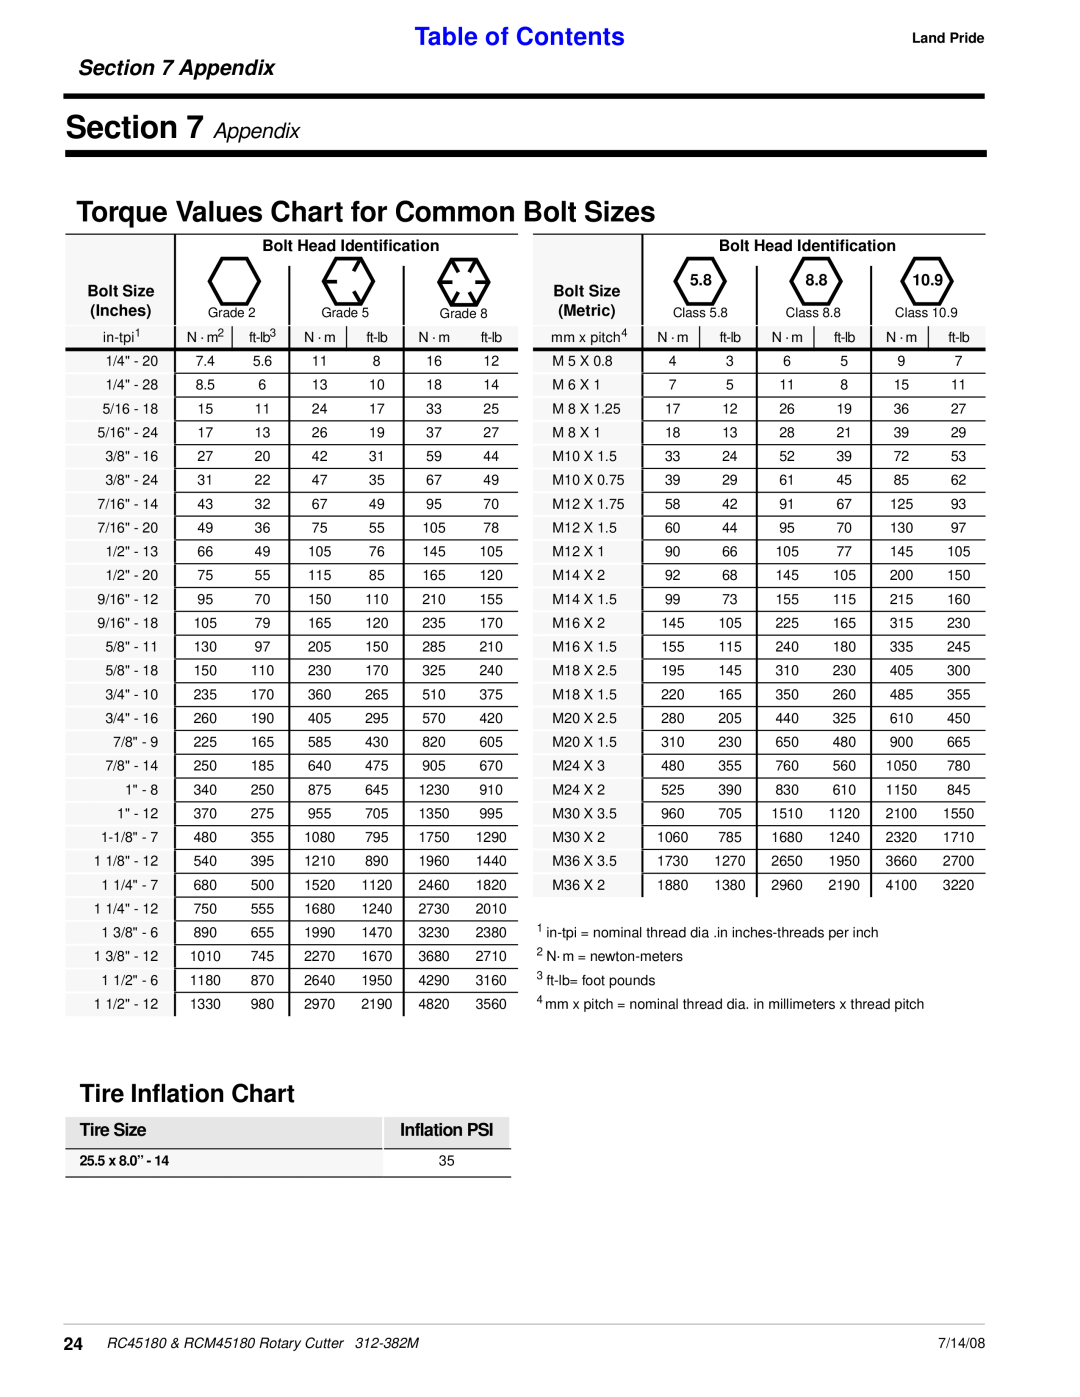 Land Pride RC45180 Appendix, Torque Values Chart for Common Bolt Sizes, Tire Inflation Chart, Table of Contents, 7/14/08 